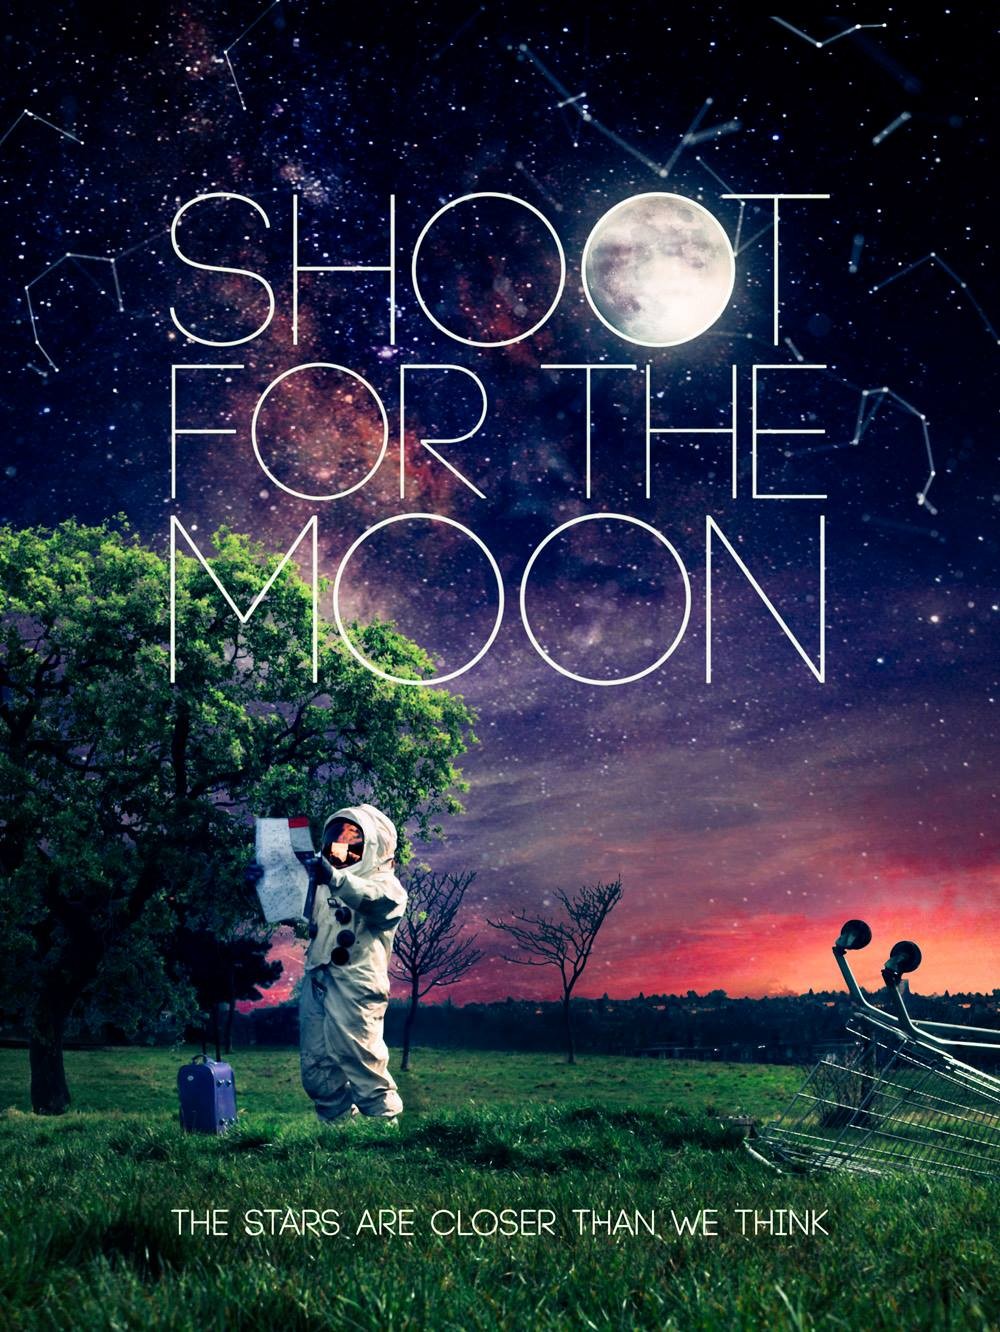 Extra Large Movie Poster Image for Shoot for the Moon